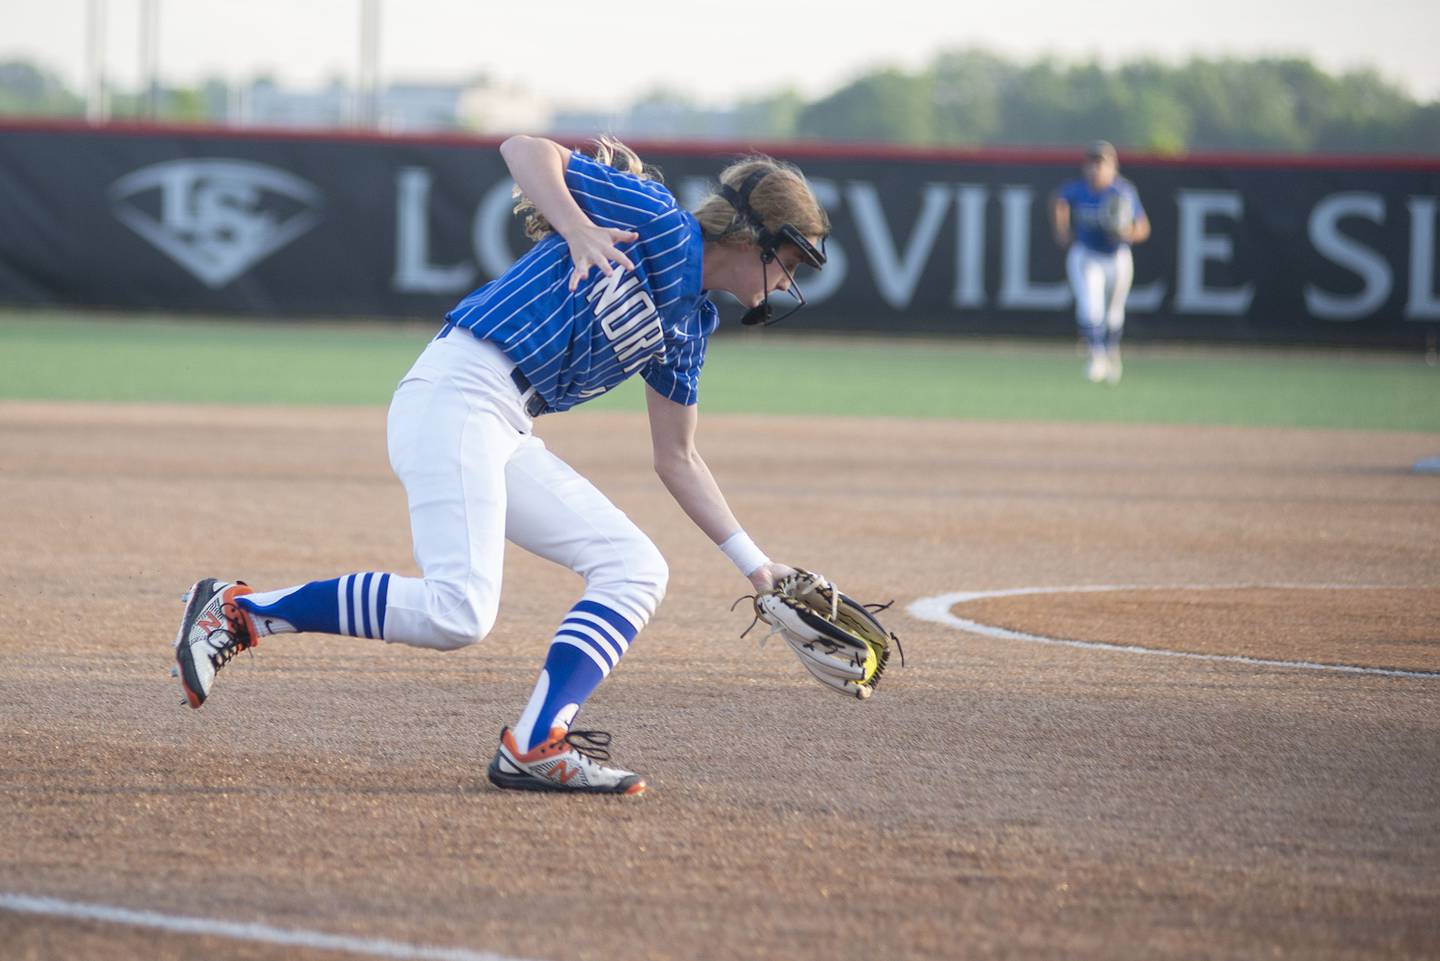 St Charles North’s Julia Larson fields a ball at third against Edwardsville Friday, June 10, 2022 in the class 4A IHSA state softball semifinal game.